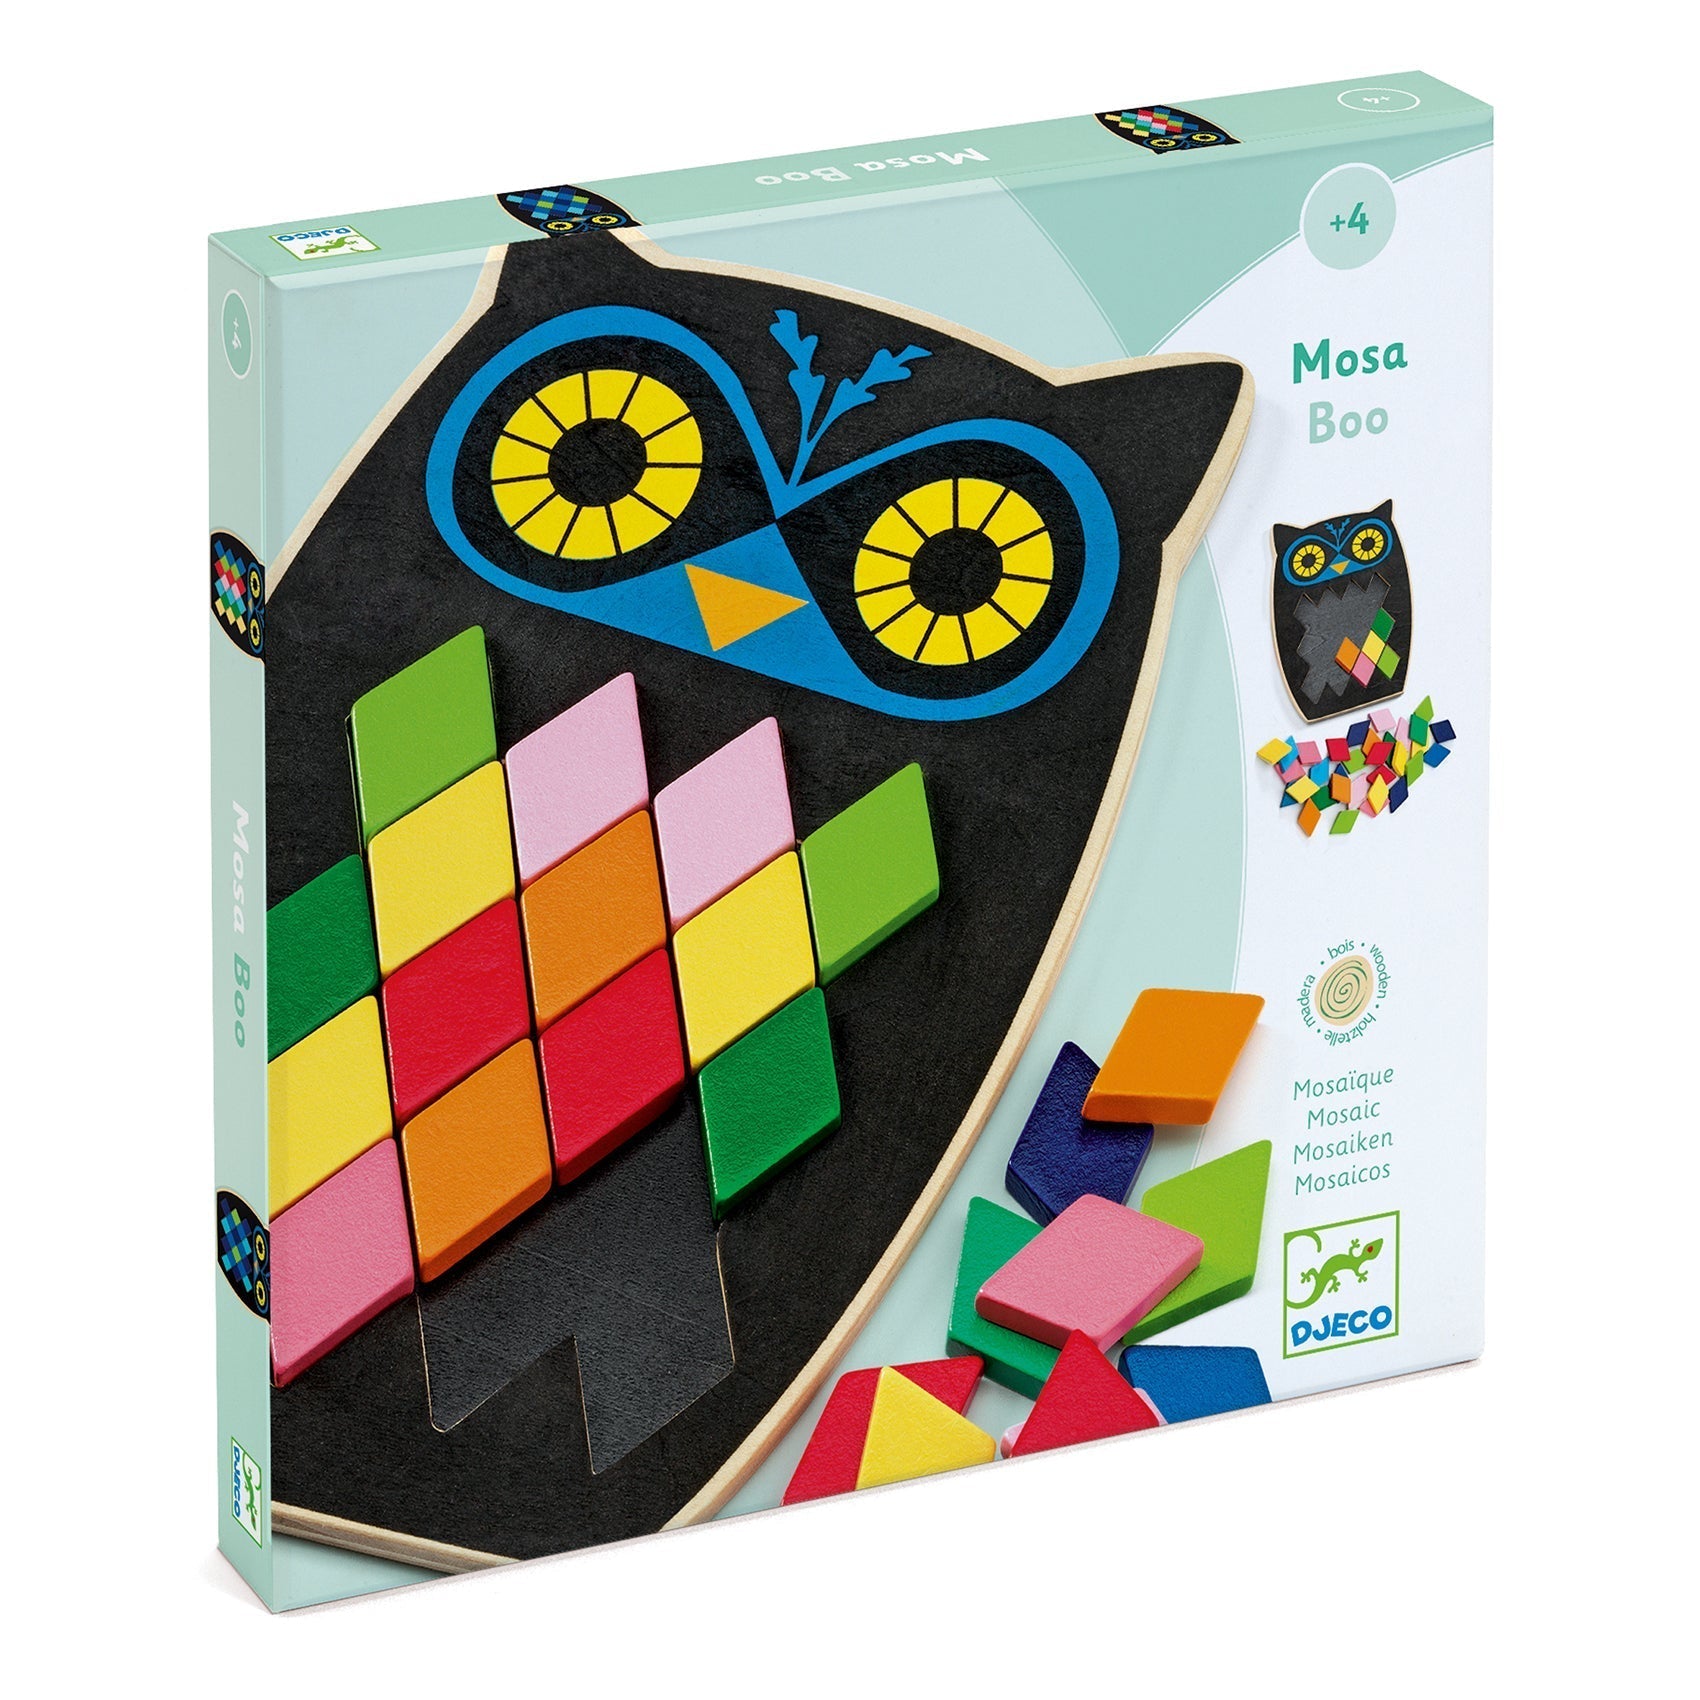 Mosa Boo - Educational Wooden Game